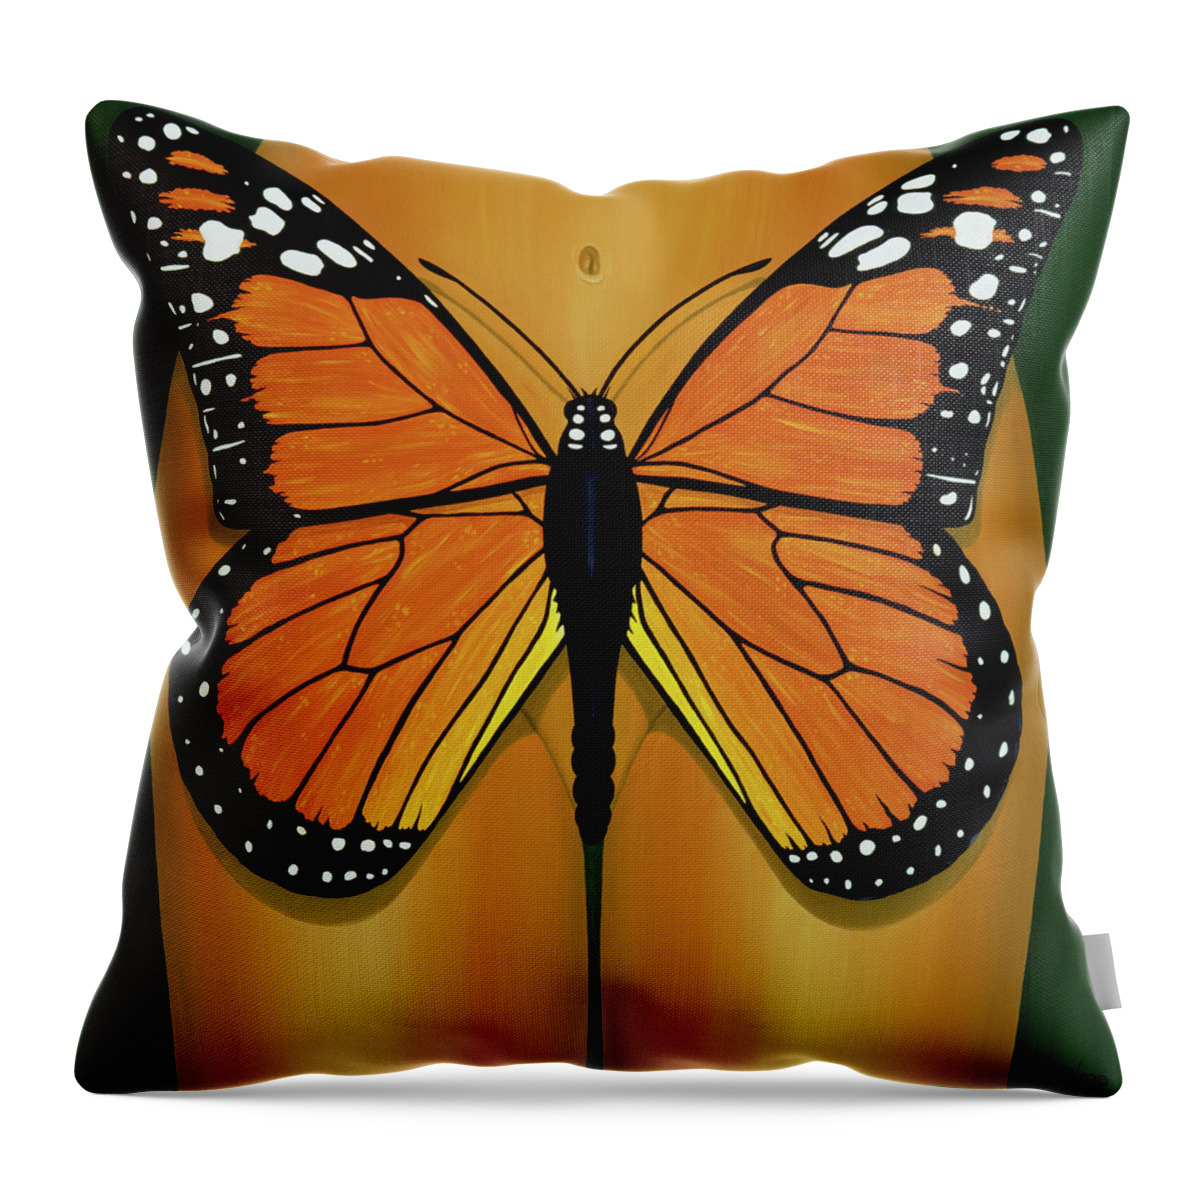  Throw Pillow featuring the painting Wandering Dream by Paxton Mobley